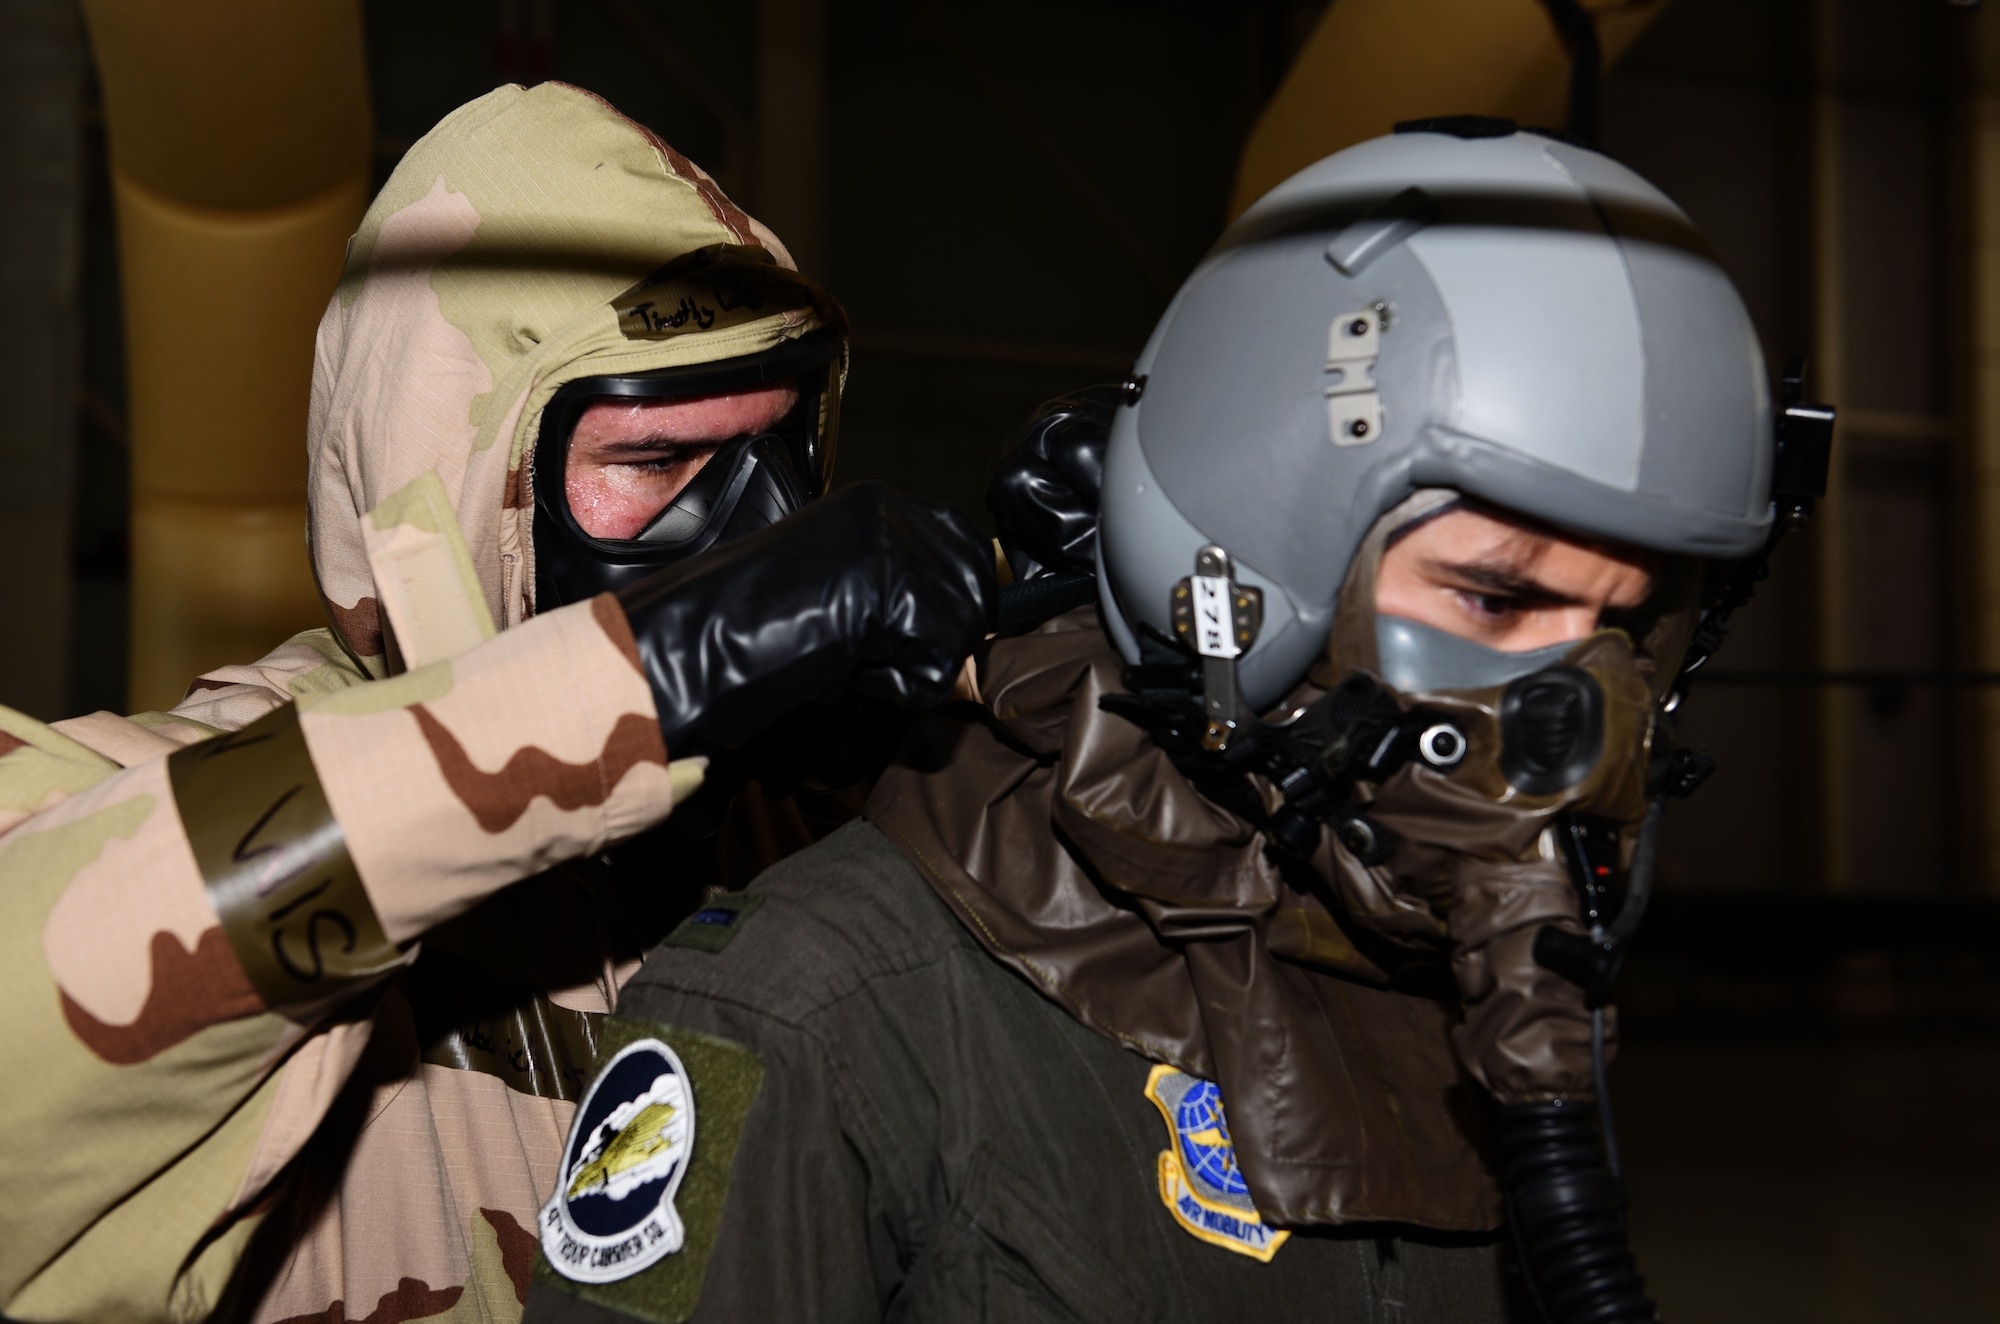 Staff Sgt. Timothy Wochnick, 317th Operations Support Squadron, aircrew flight equipment, assists 1st Lt. Garrett Iapicco, 40th Airlift Squadron, co-pilot through the decontamination line